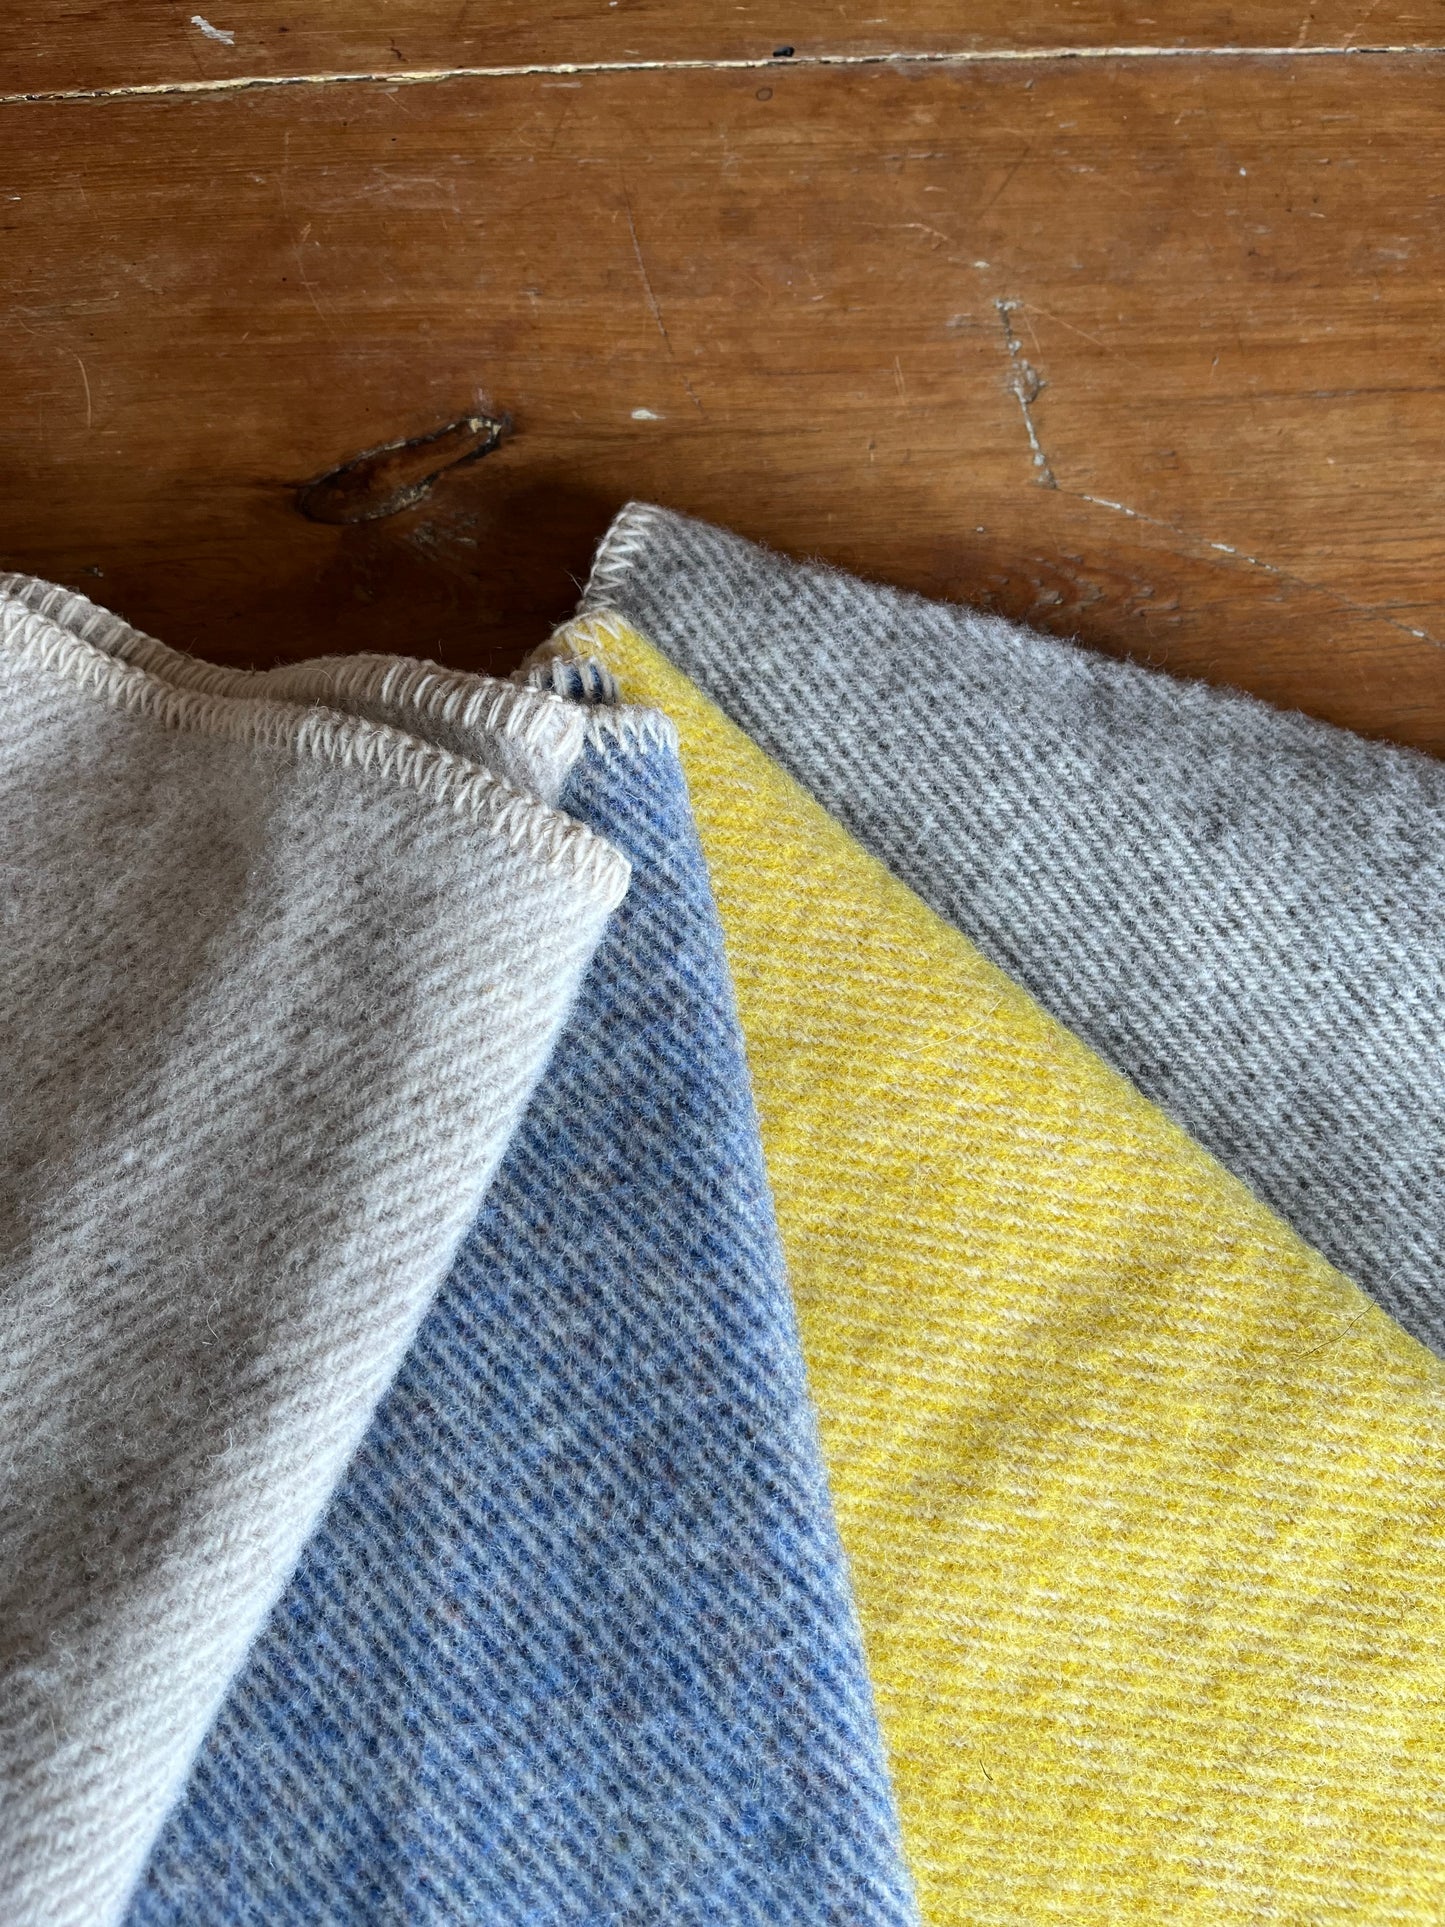 Wool BLANKETS FOR CHILDREN, Adults & Baby too… 12 colour choices!